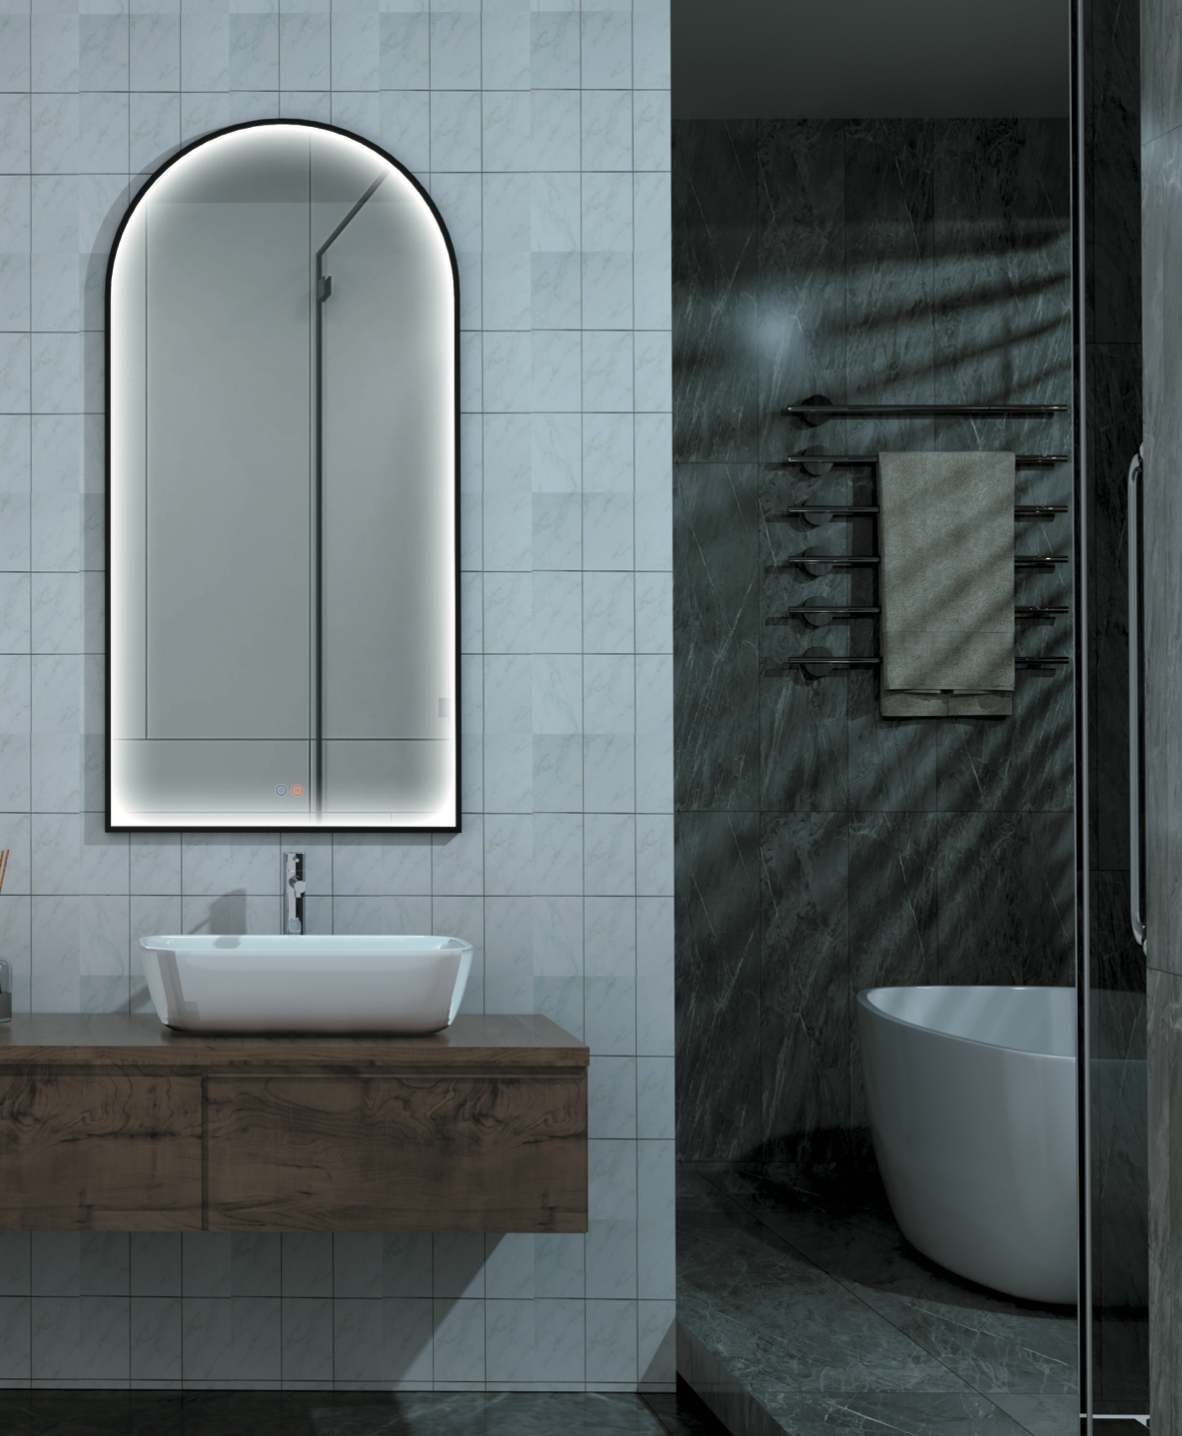 Bathroom mirror with perimeter light integrated into Roma frame by Ledimex